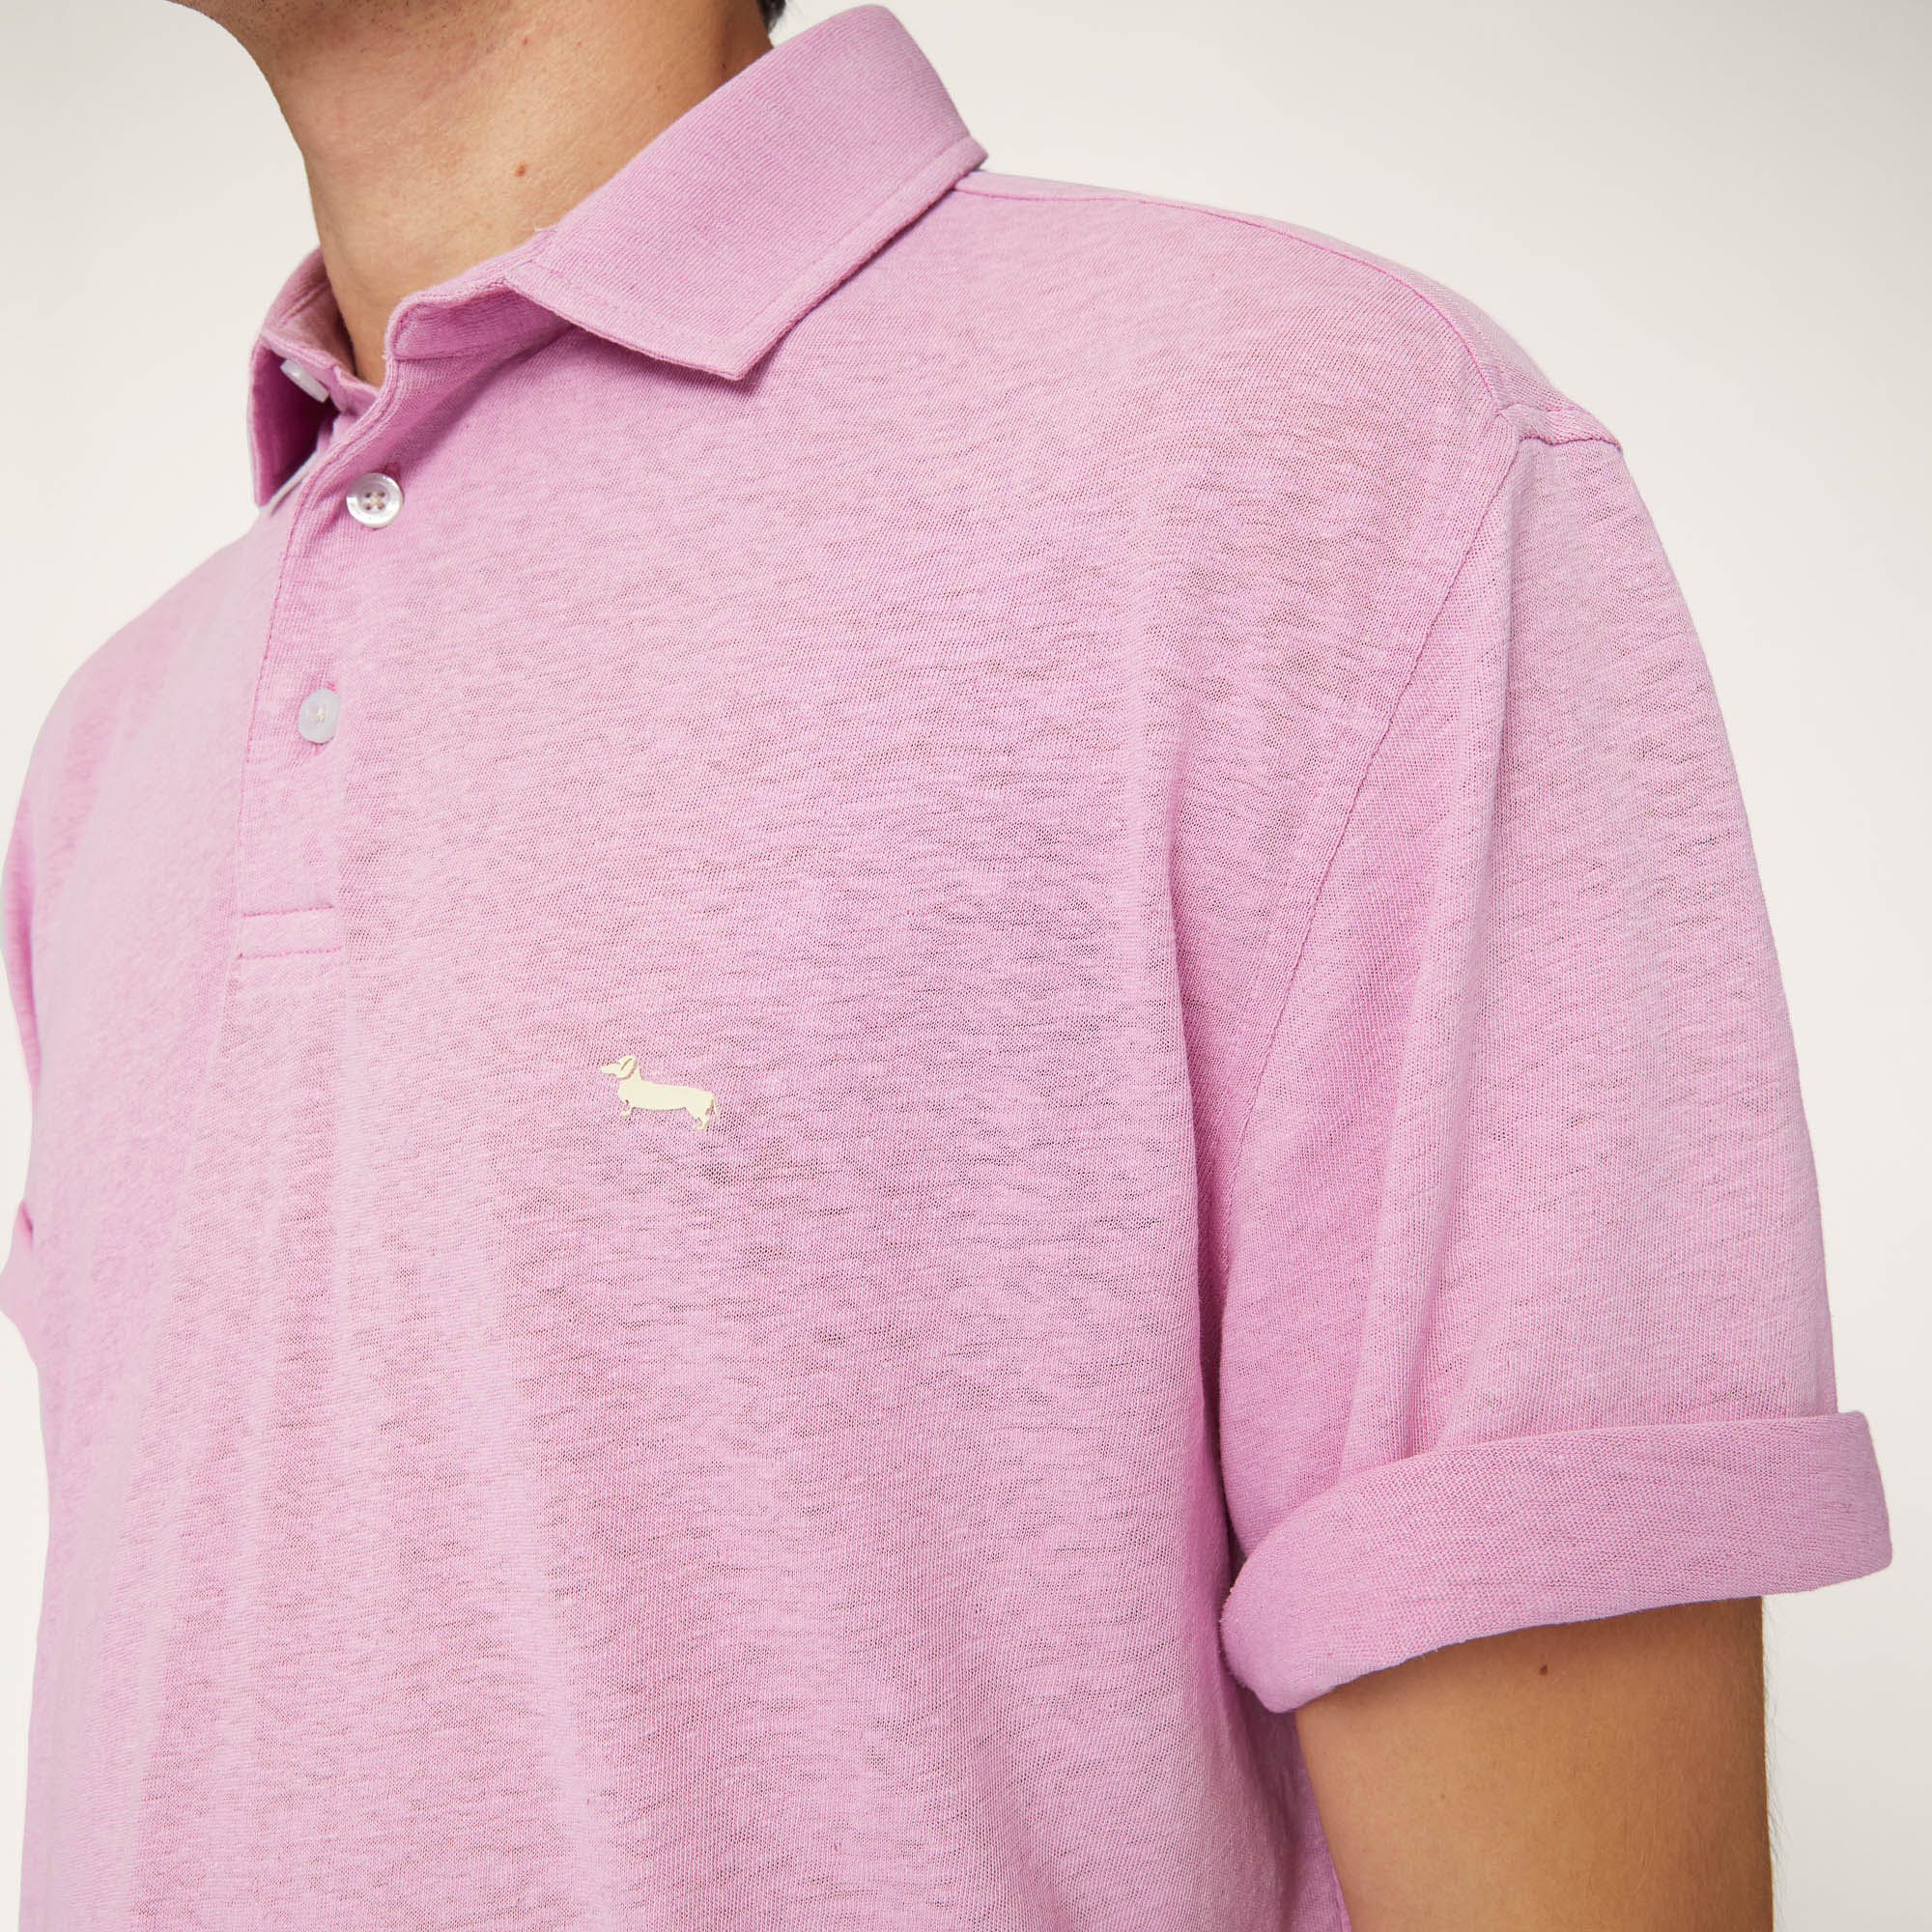 Cotton and Linen Jersey Polo, Lilac, large image number 2